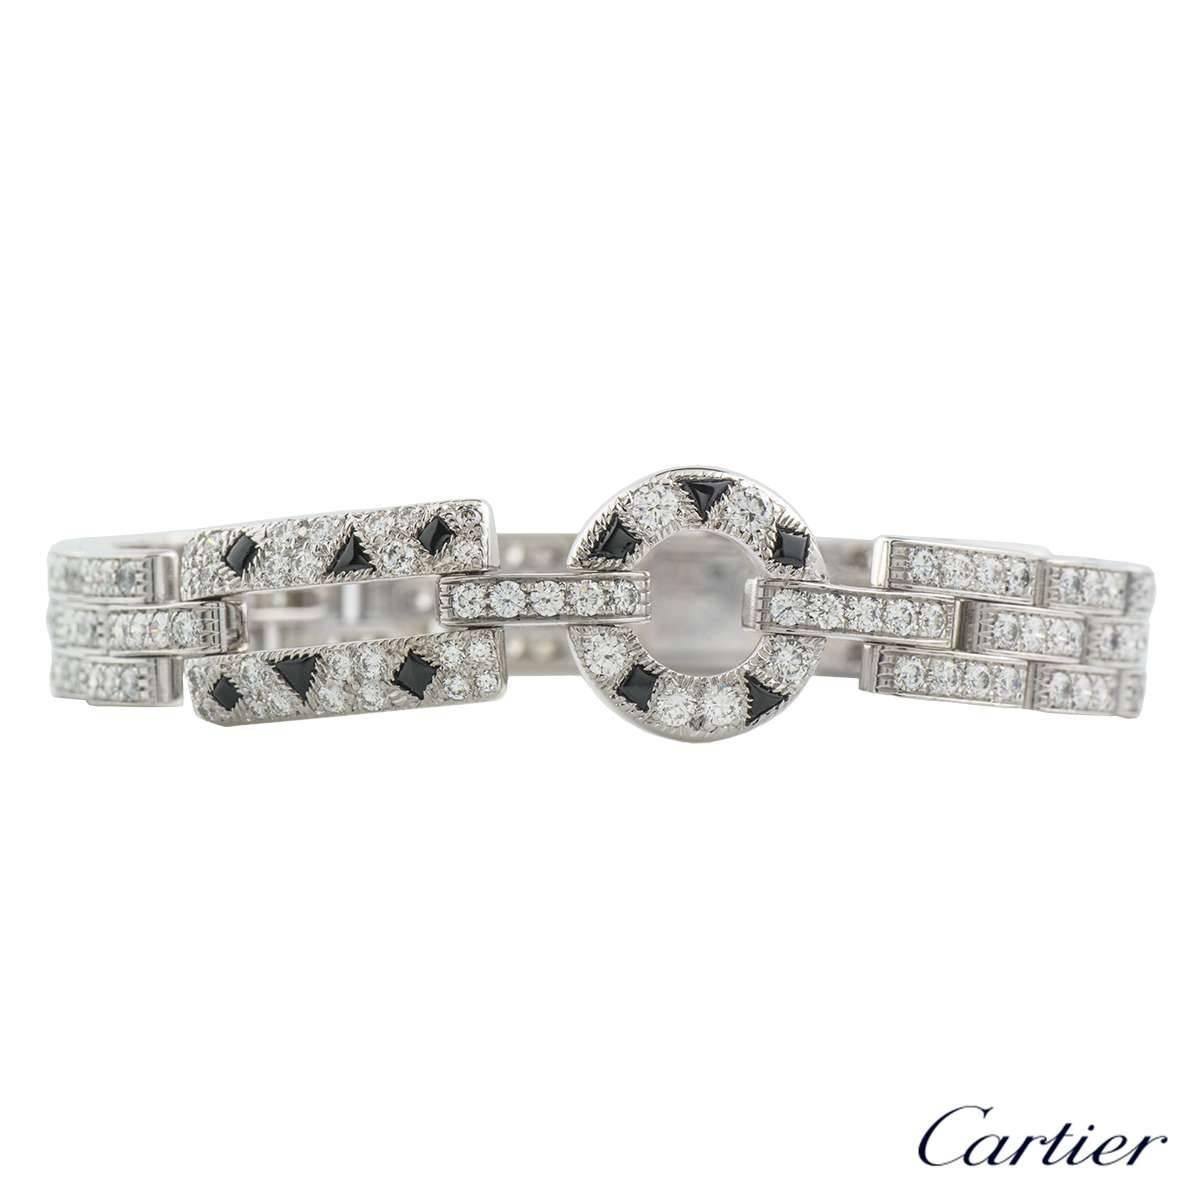 A beautiful Cartier 18k white gold diamond and onyx bracelet from the Panthere de Cartier collection. The bracelet comprises of 3 rows of linked bars with round brilliant cut diamonds, meeting in the middle is an open work loop and a rectangle with